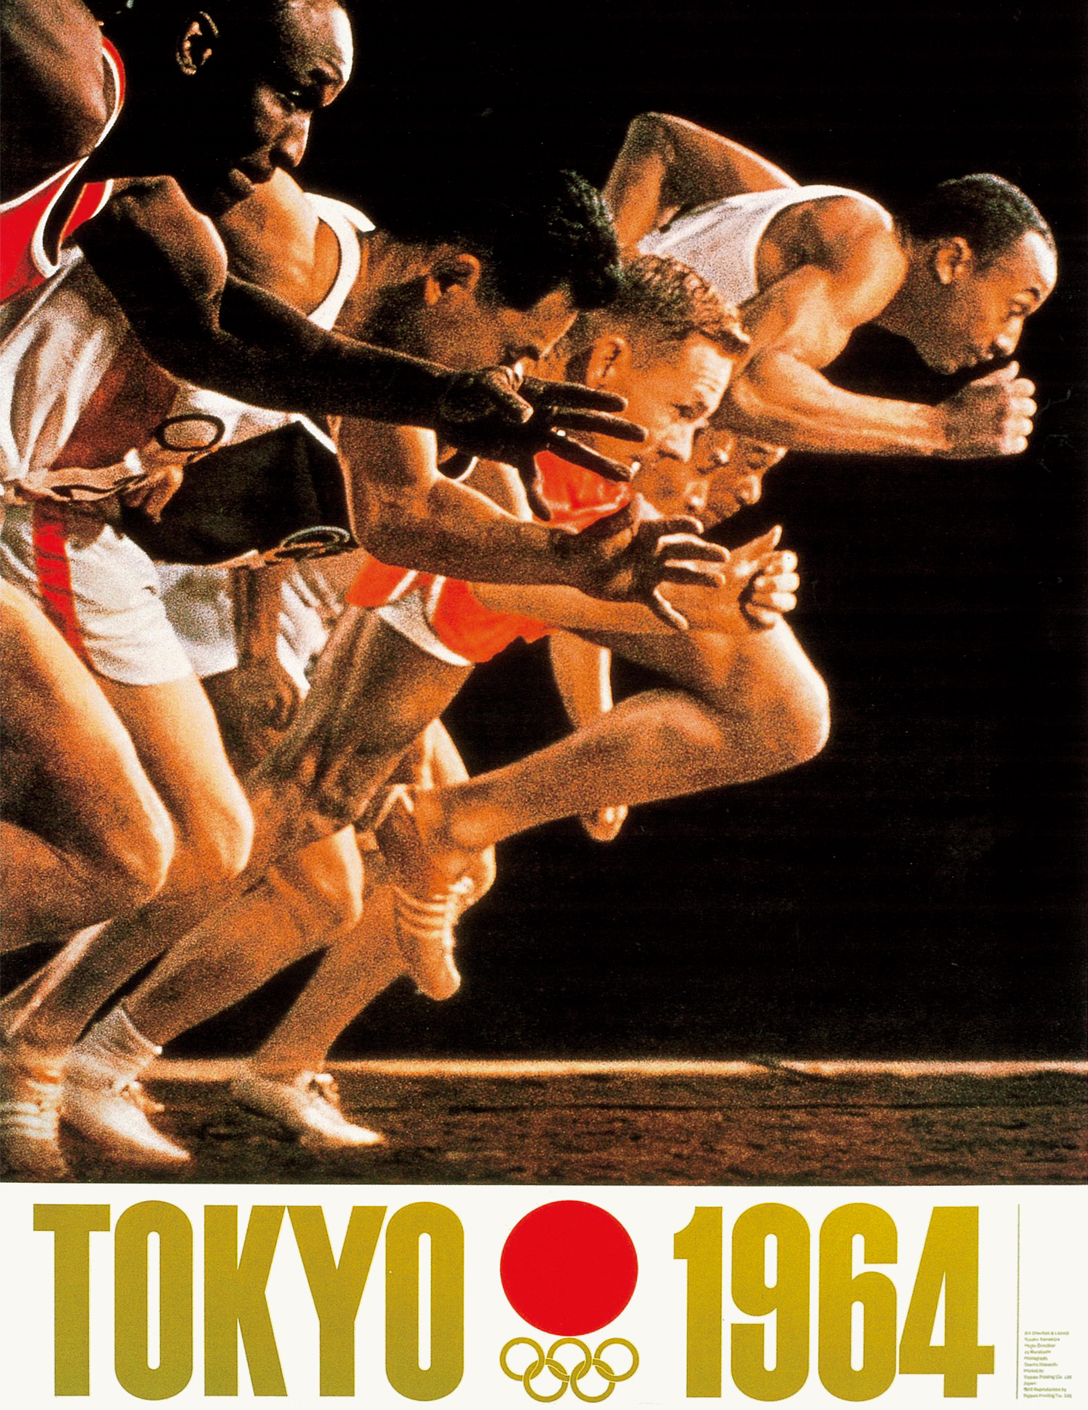 Tokyo 1964 Olympic Games Posters No. 2 and No. 3